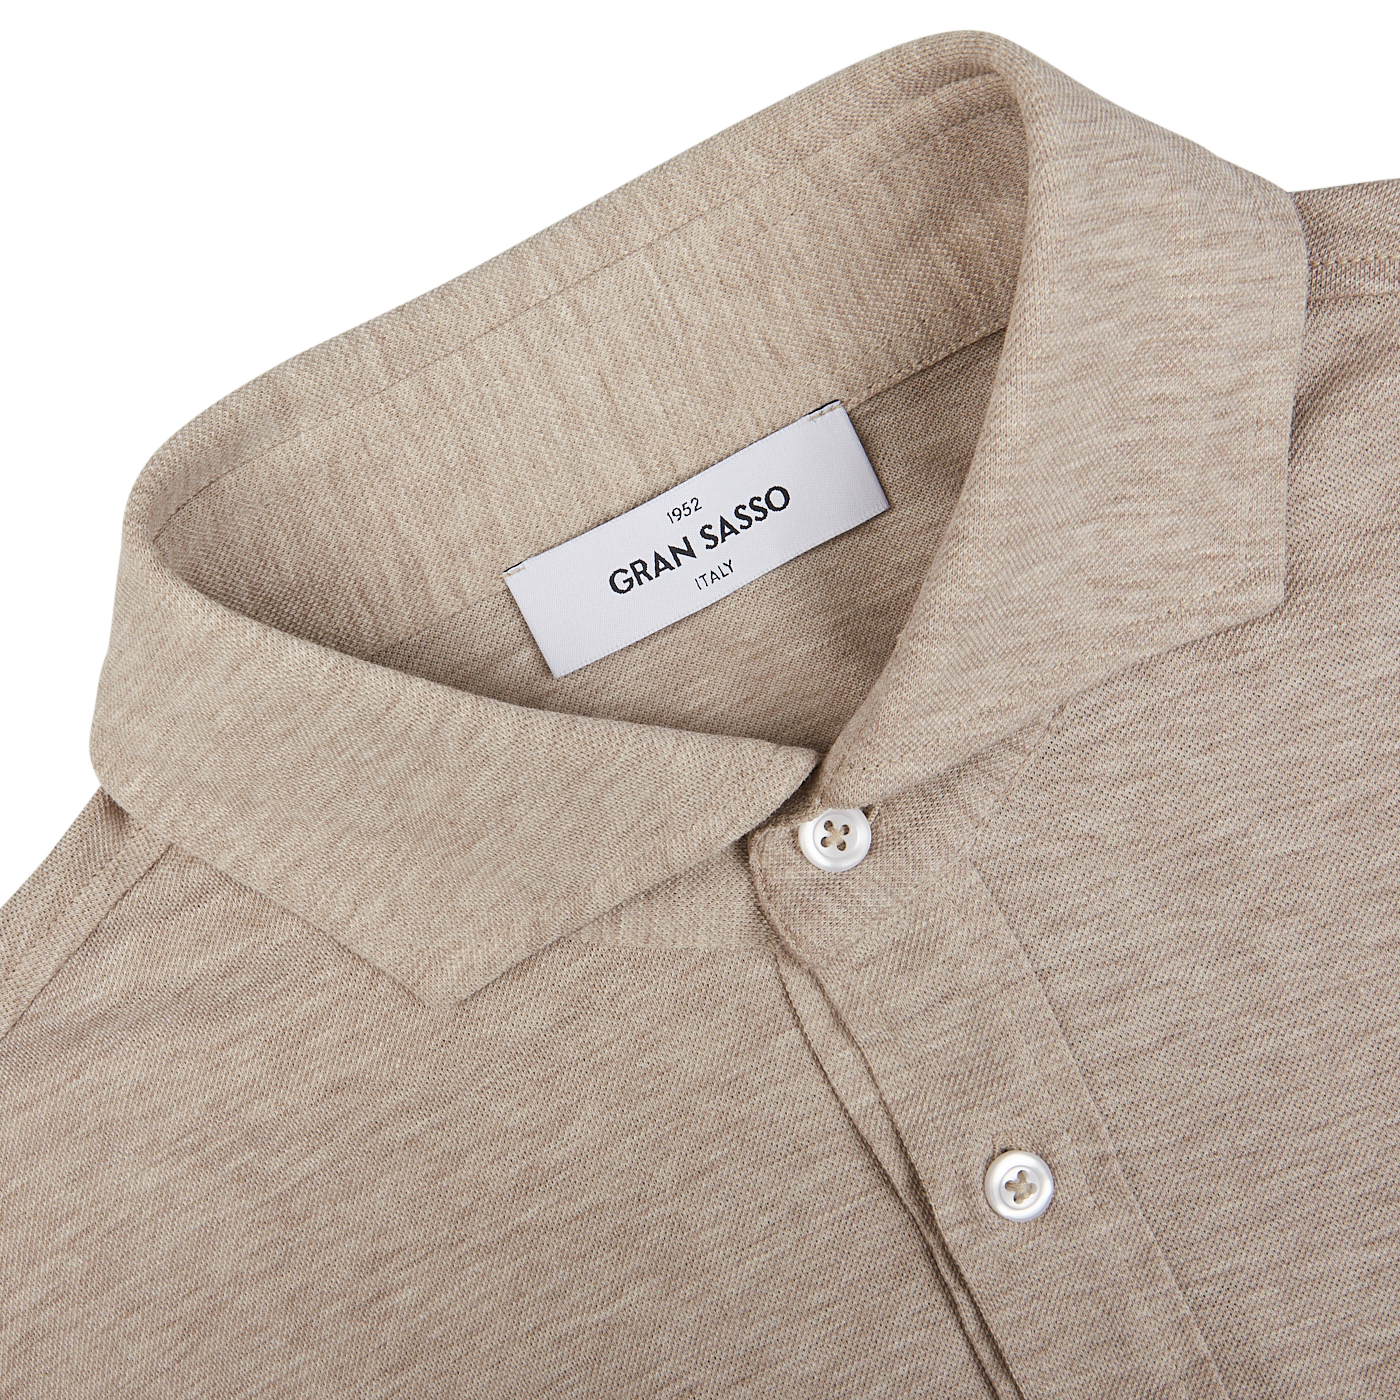 Gran Sasso Beige Cotton Jersey Popover Shirt with a close-up on the collar and brand label.